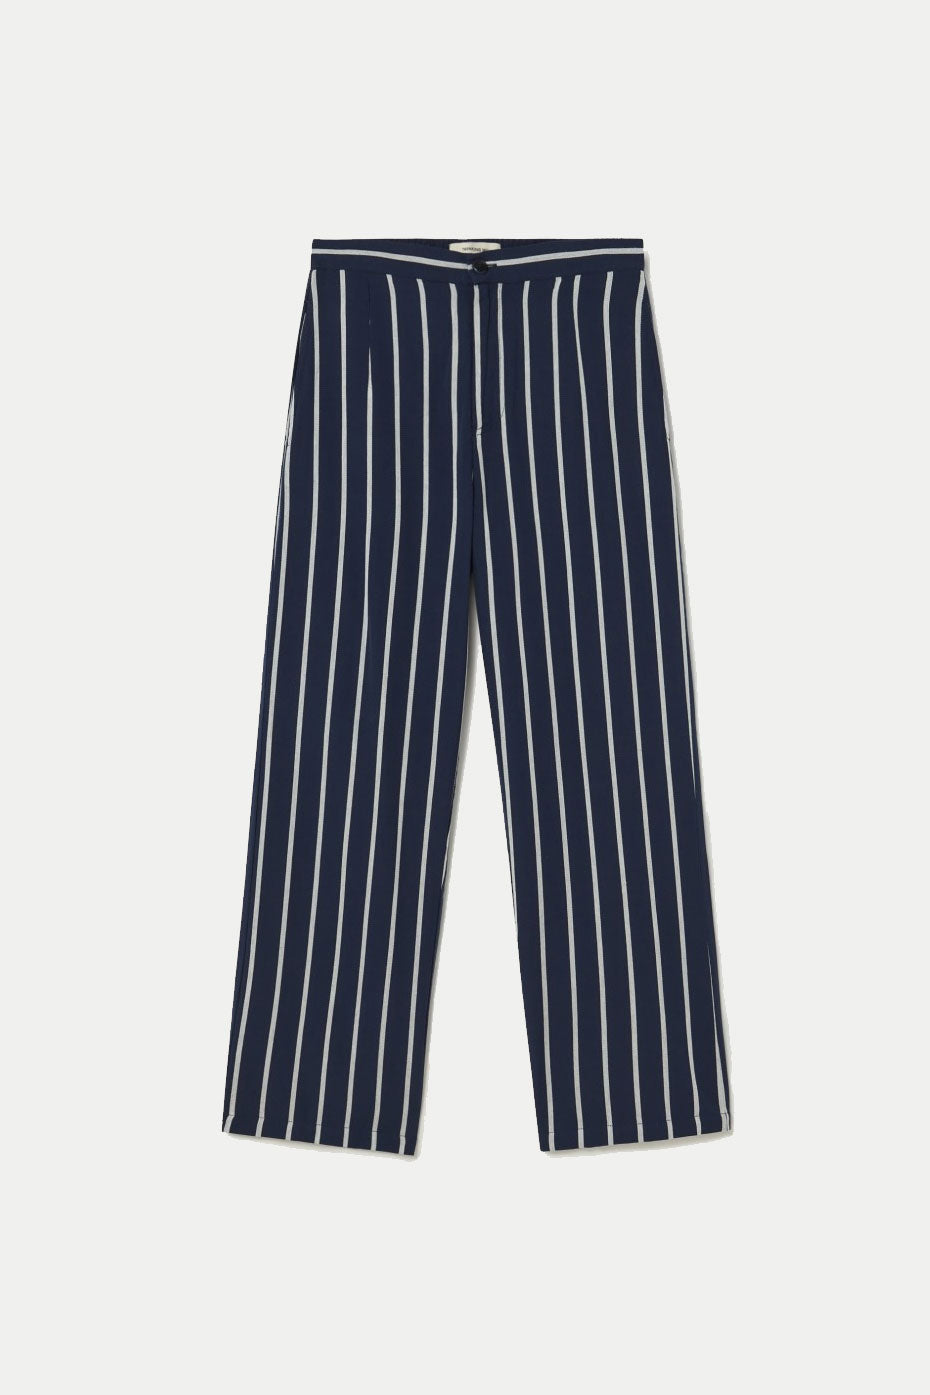 Navy Striped Mariam Pants